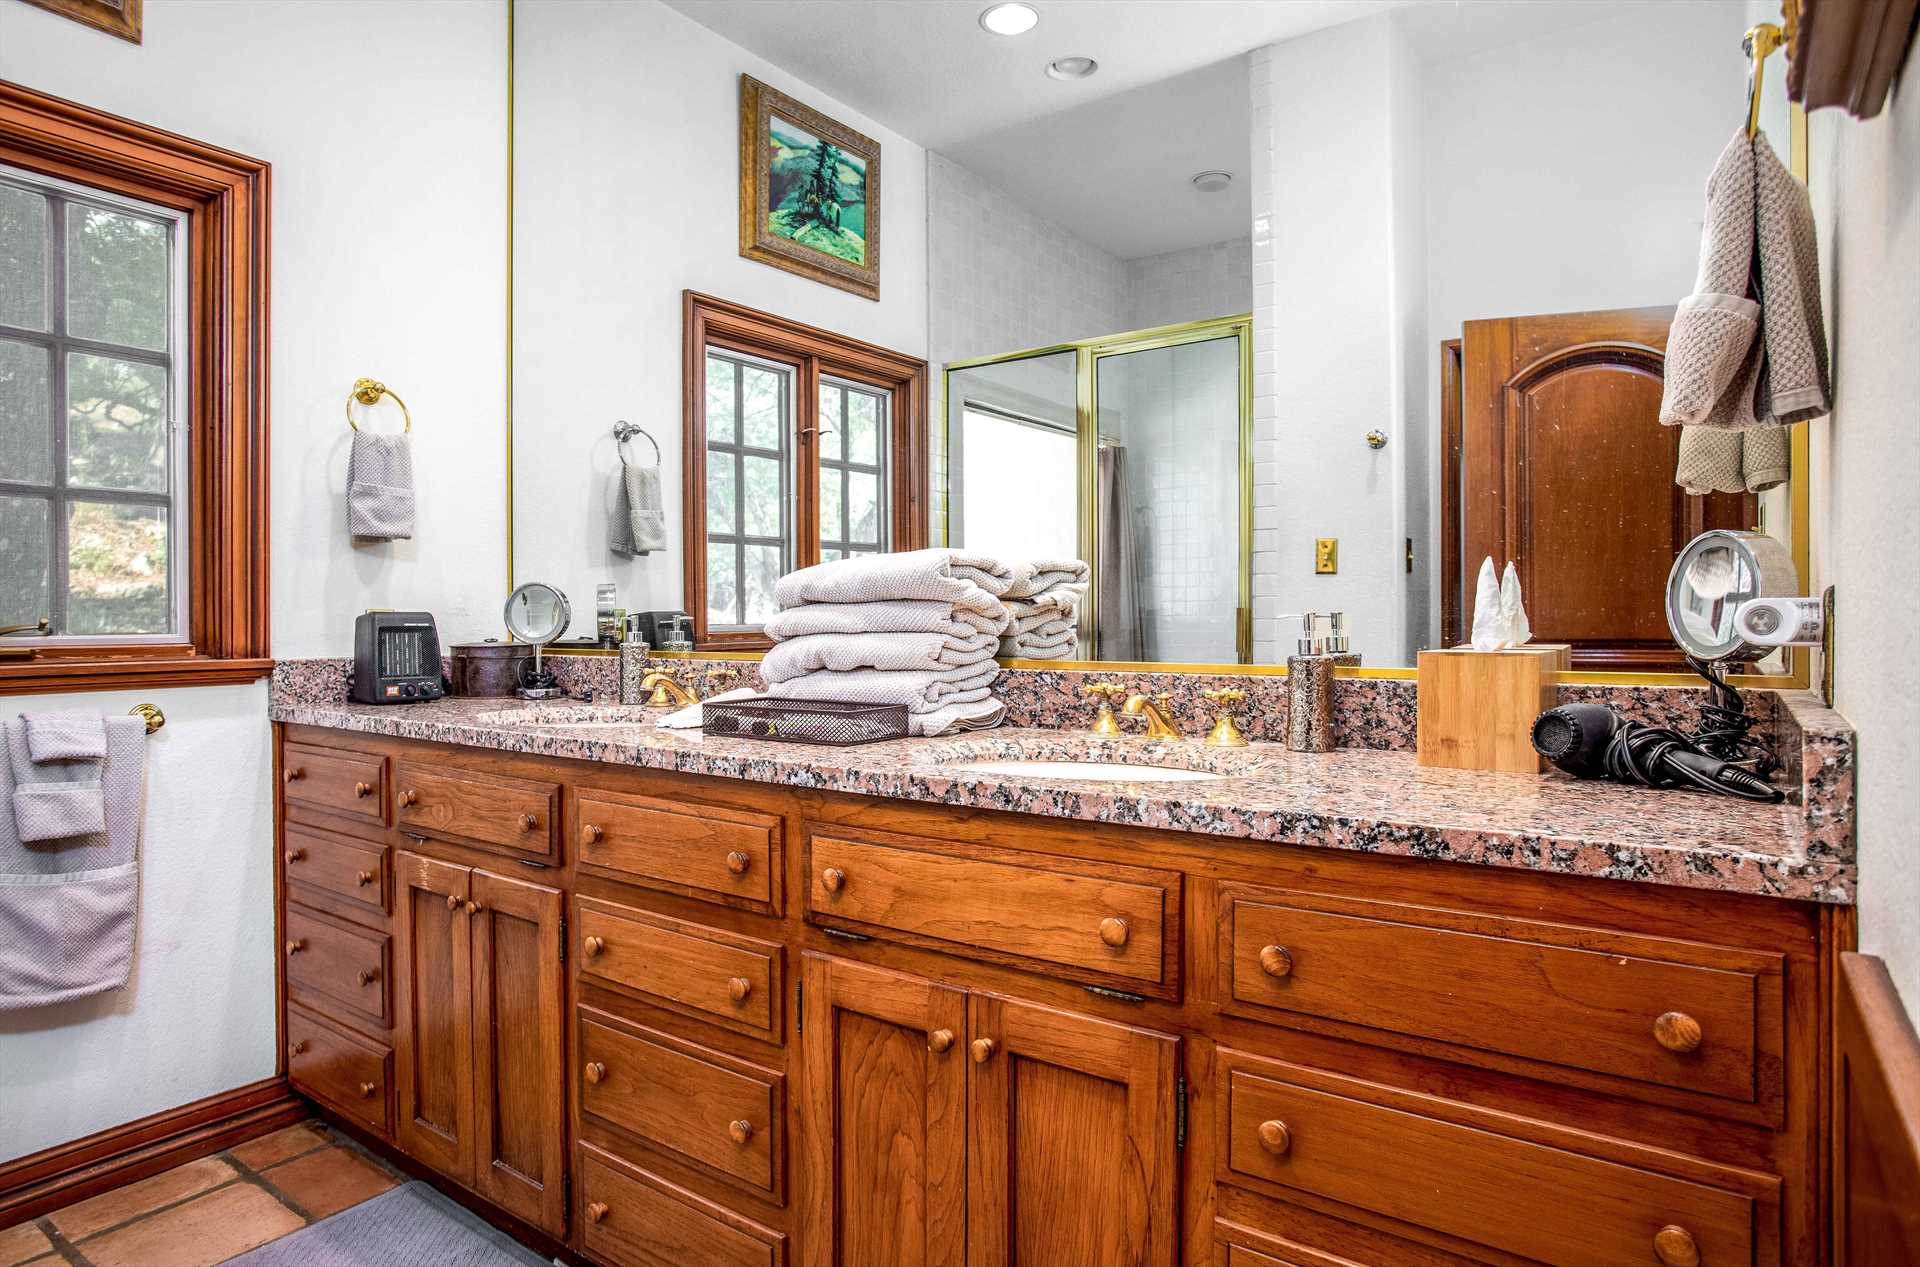                                                 A roomy double vanity with plenty of toiletry space is installed in the full bath at the Homestead, and all cleanup spaces come with essential toiletries and clean linens, as well.